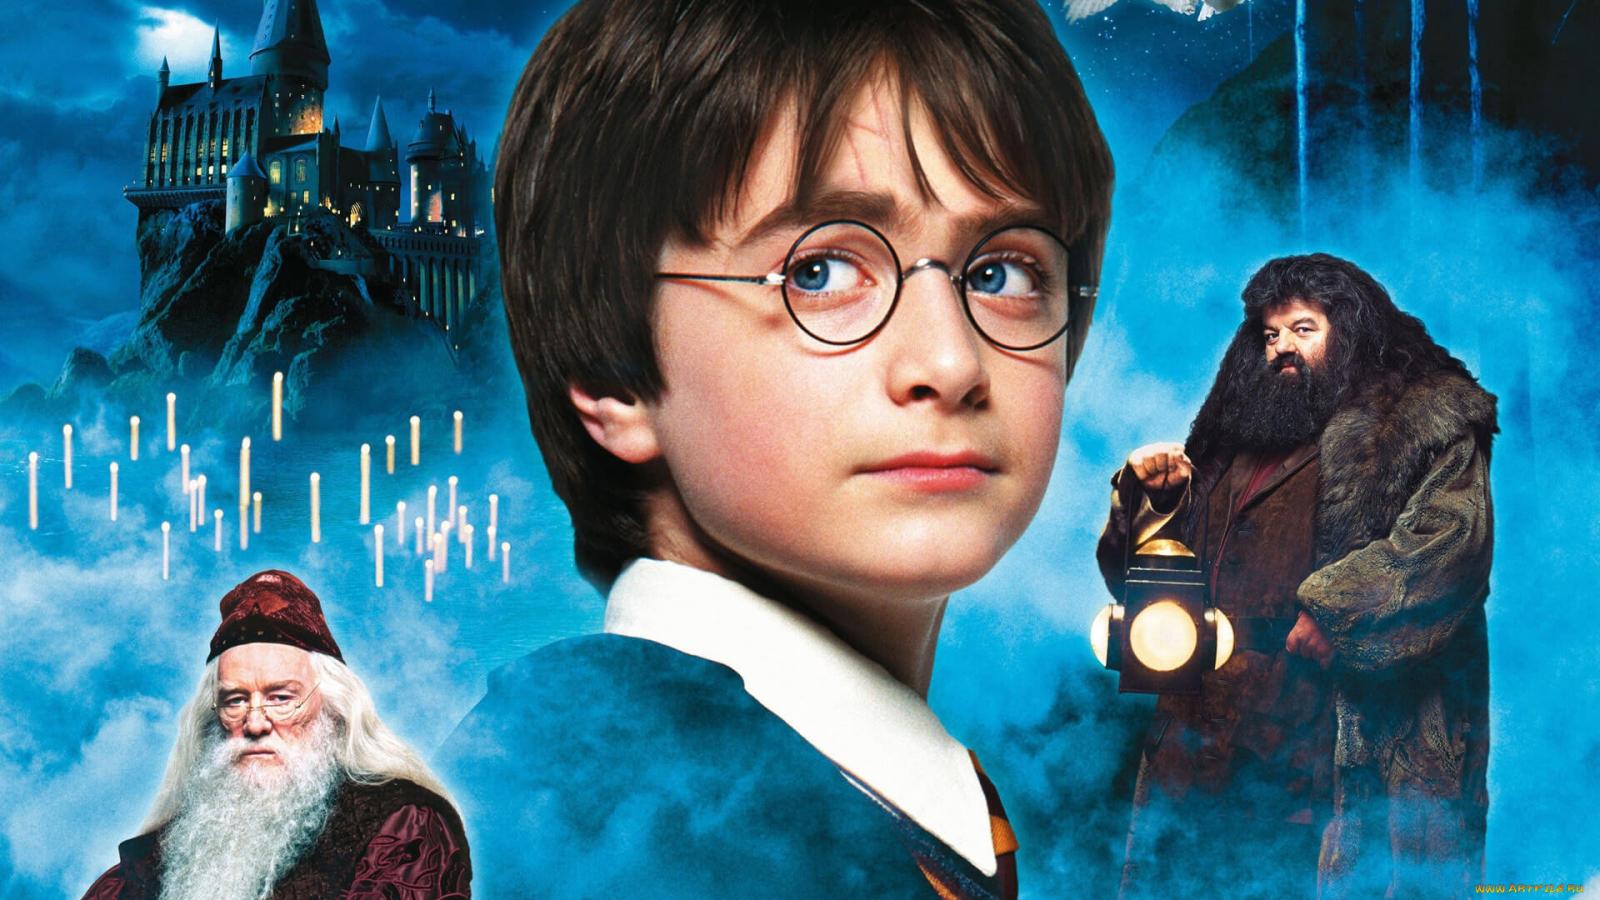 Daniel Radcliffe’s Age is a Harsh Reality Check For Younger Harry Potter Fans - image 1